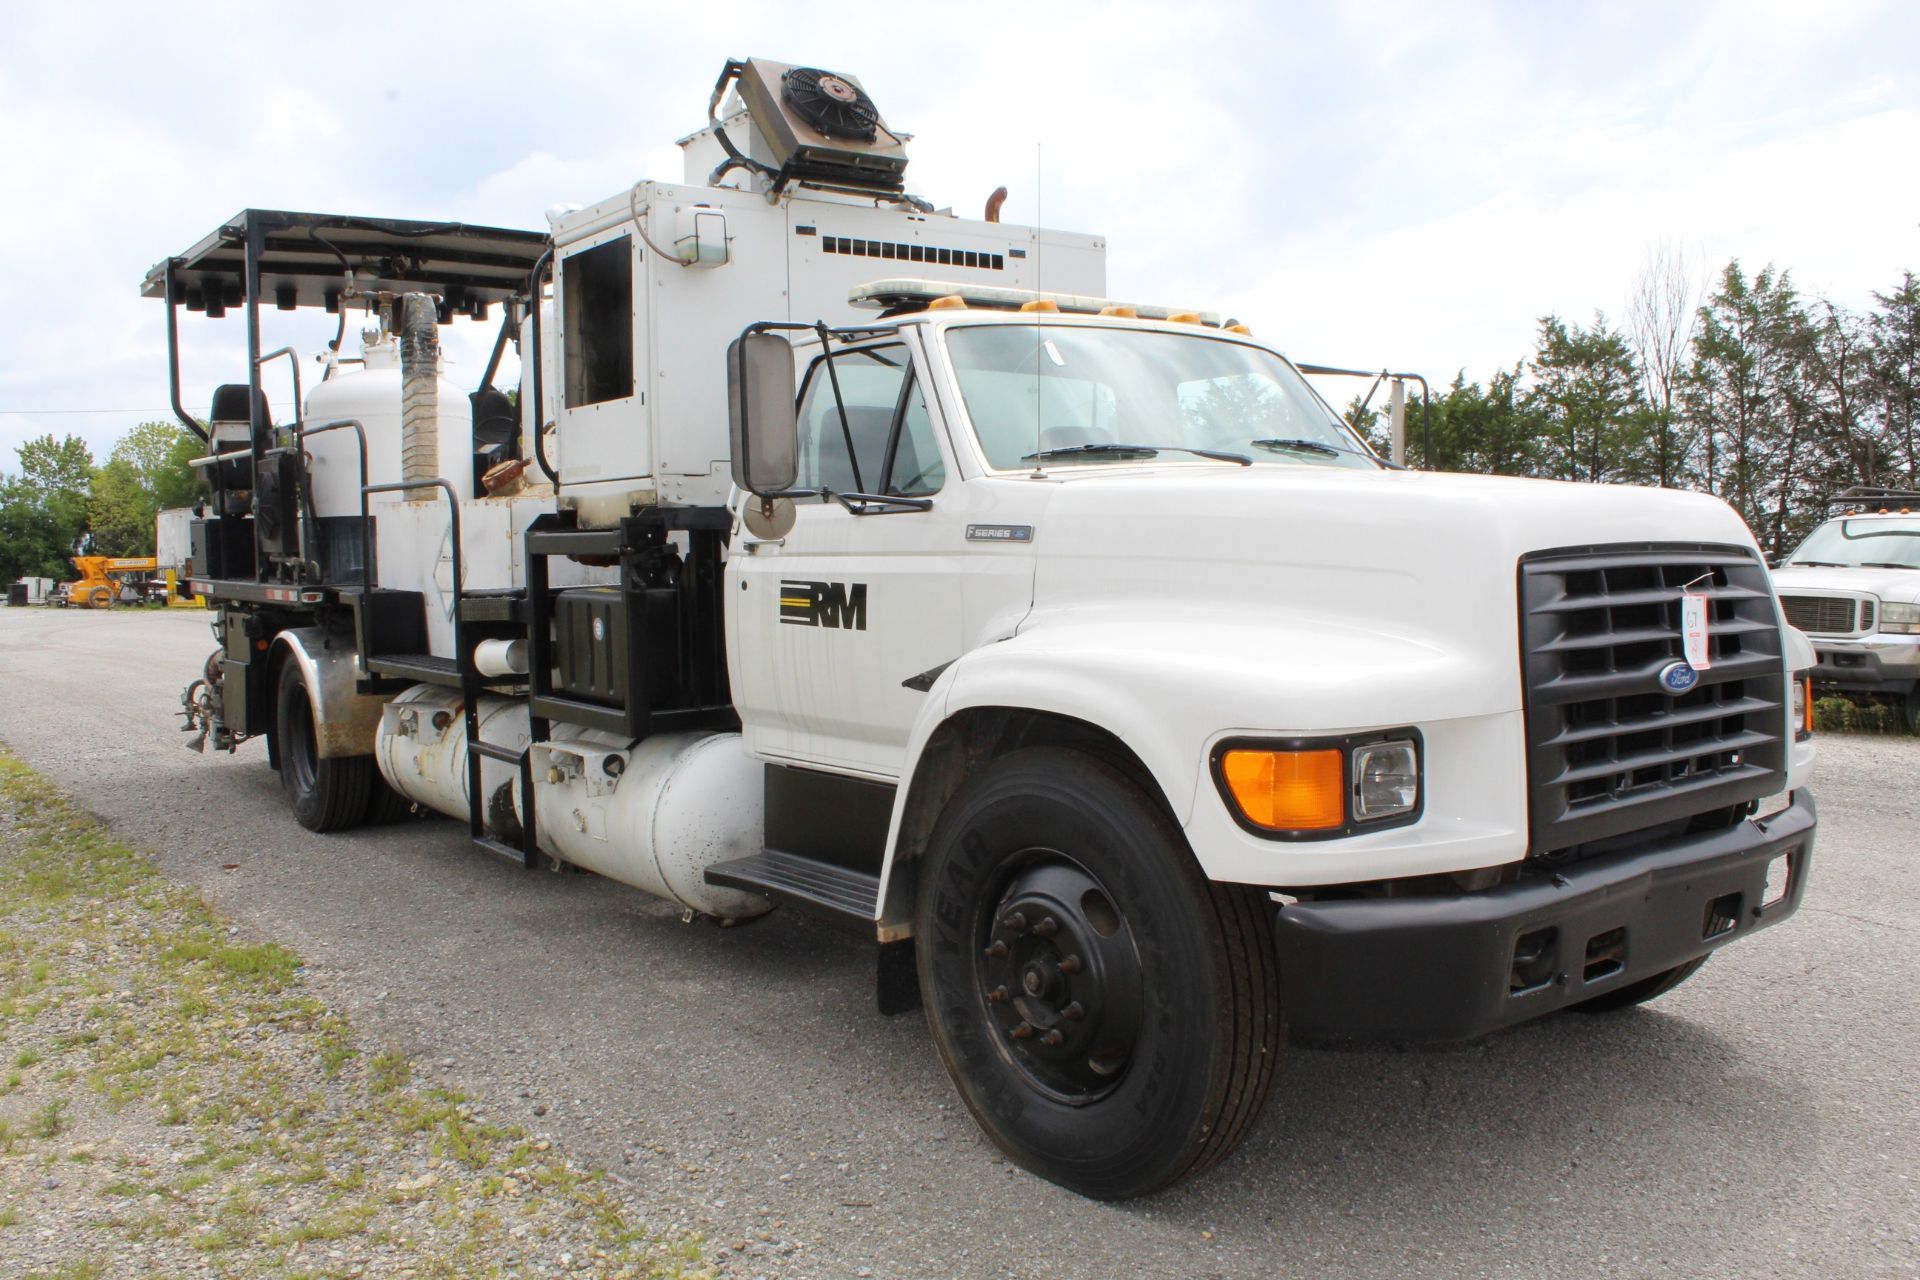 2004 MRL 4000 PT Paint Striper, s/n 04404 mounted on 1995 Ford F800 VIN 1FDWF80C1SVA44334 14 DAY - Image 2 of 7